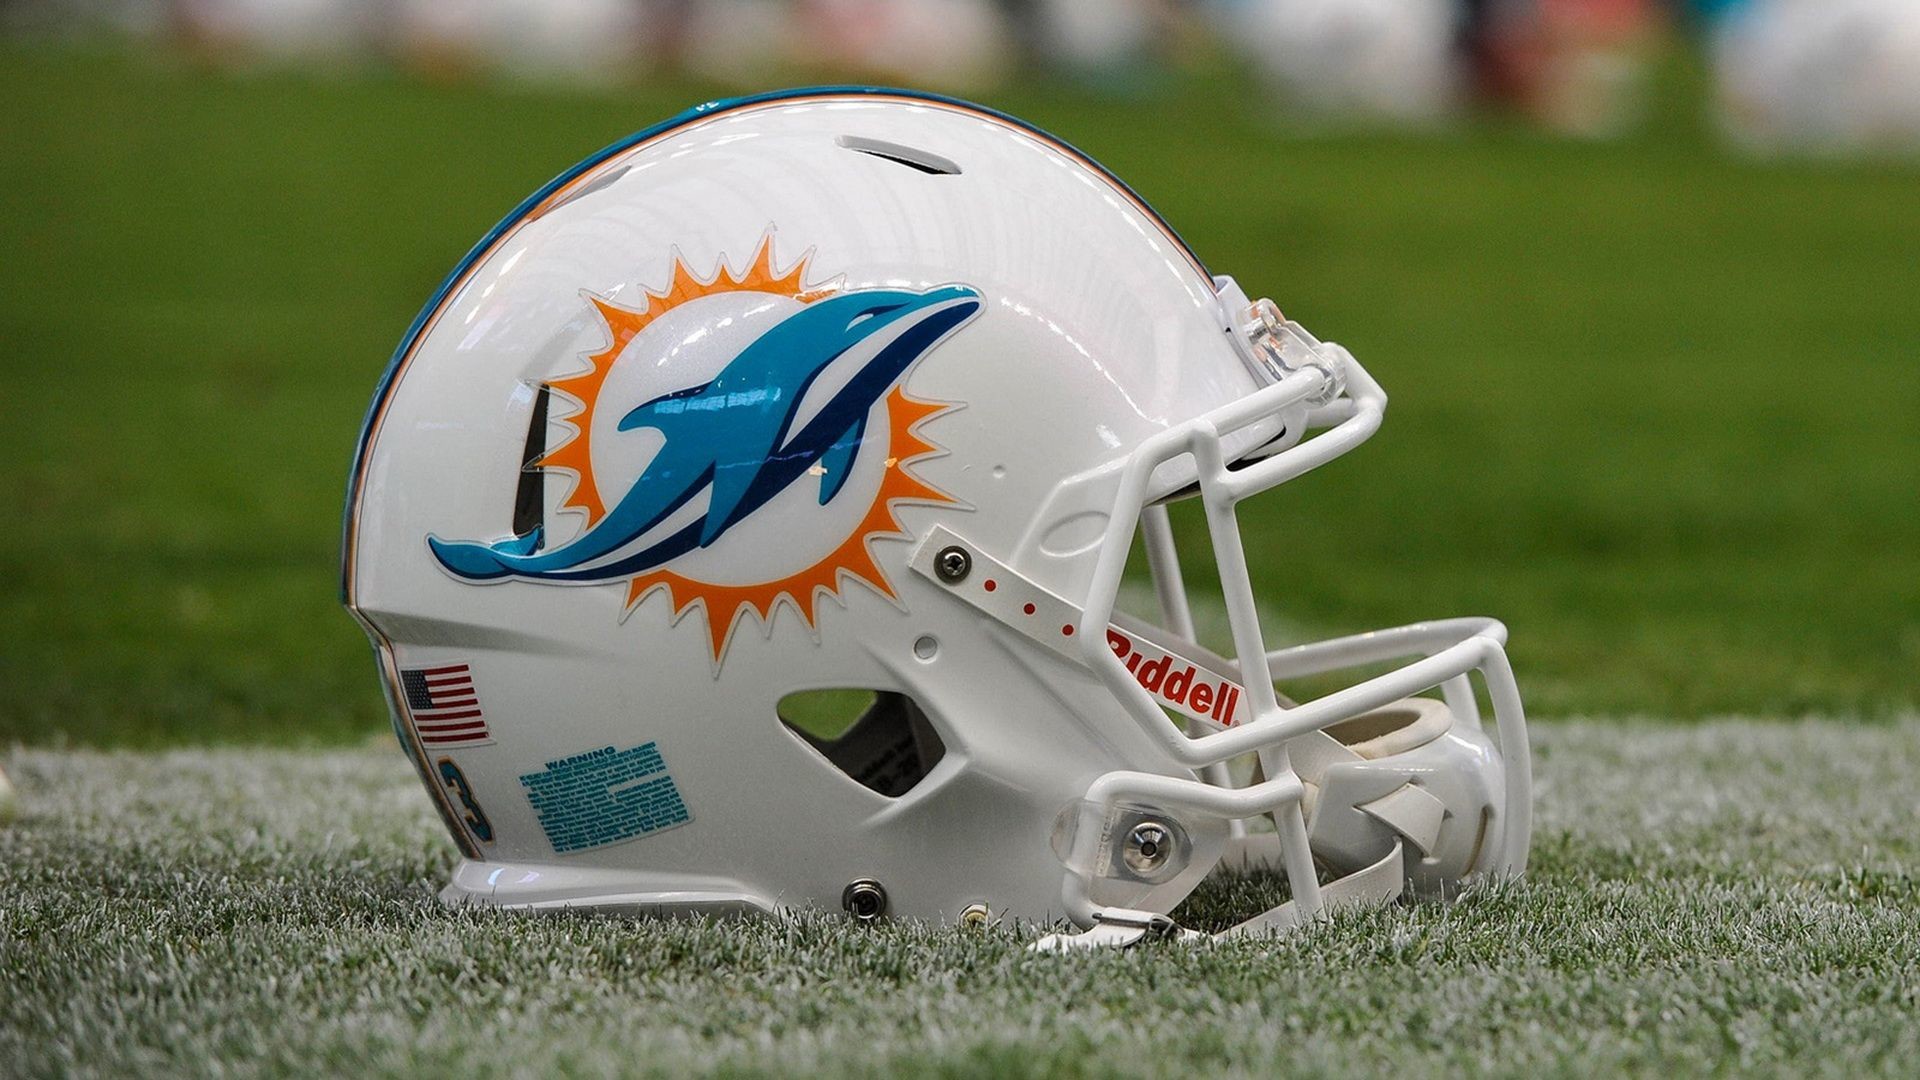 1920x1080 10 Most Popular Miami Dolphins Logo Wallpaper FULL HD 1080p For PC